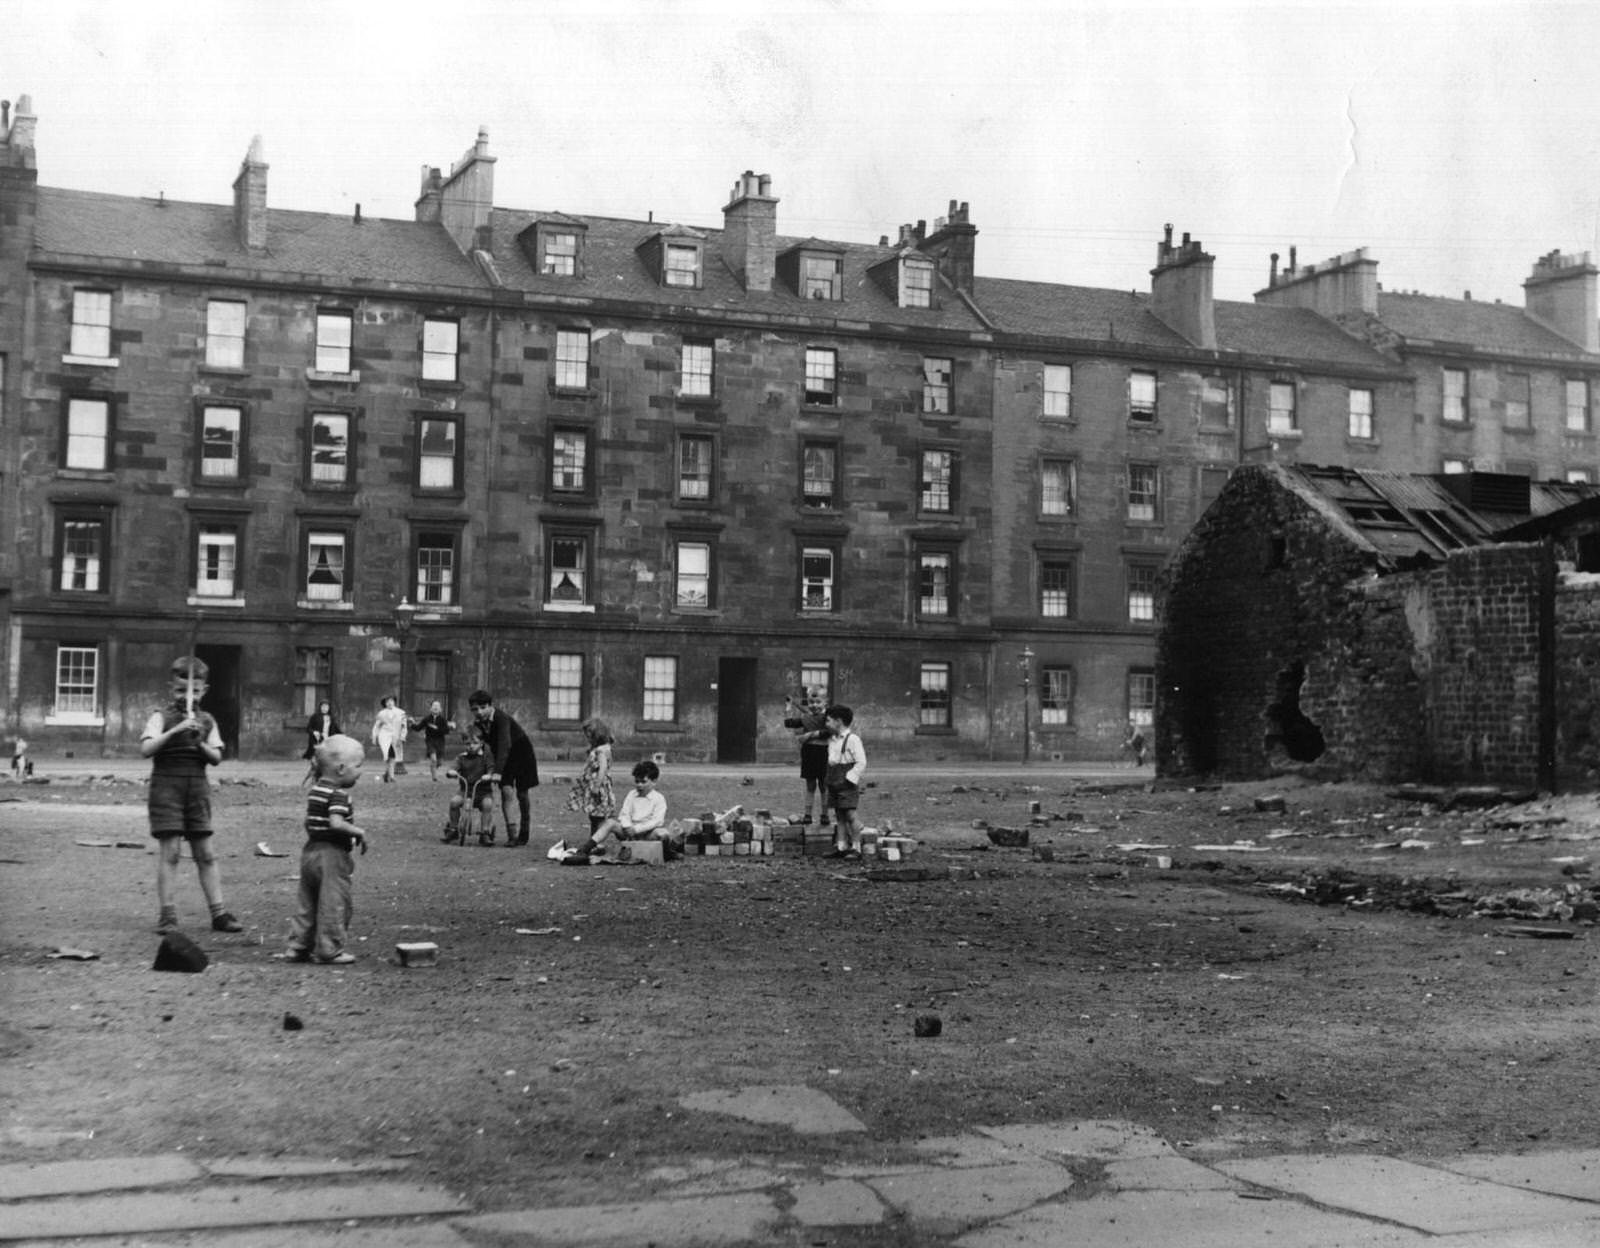 An open site which children in the Gorbals area of Glasgow use for playing, 1961